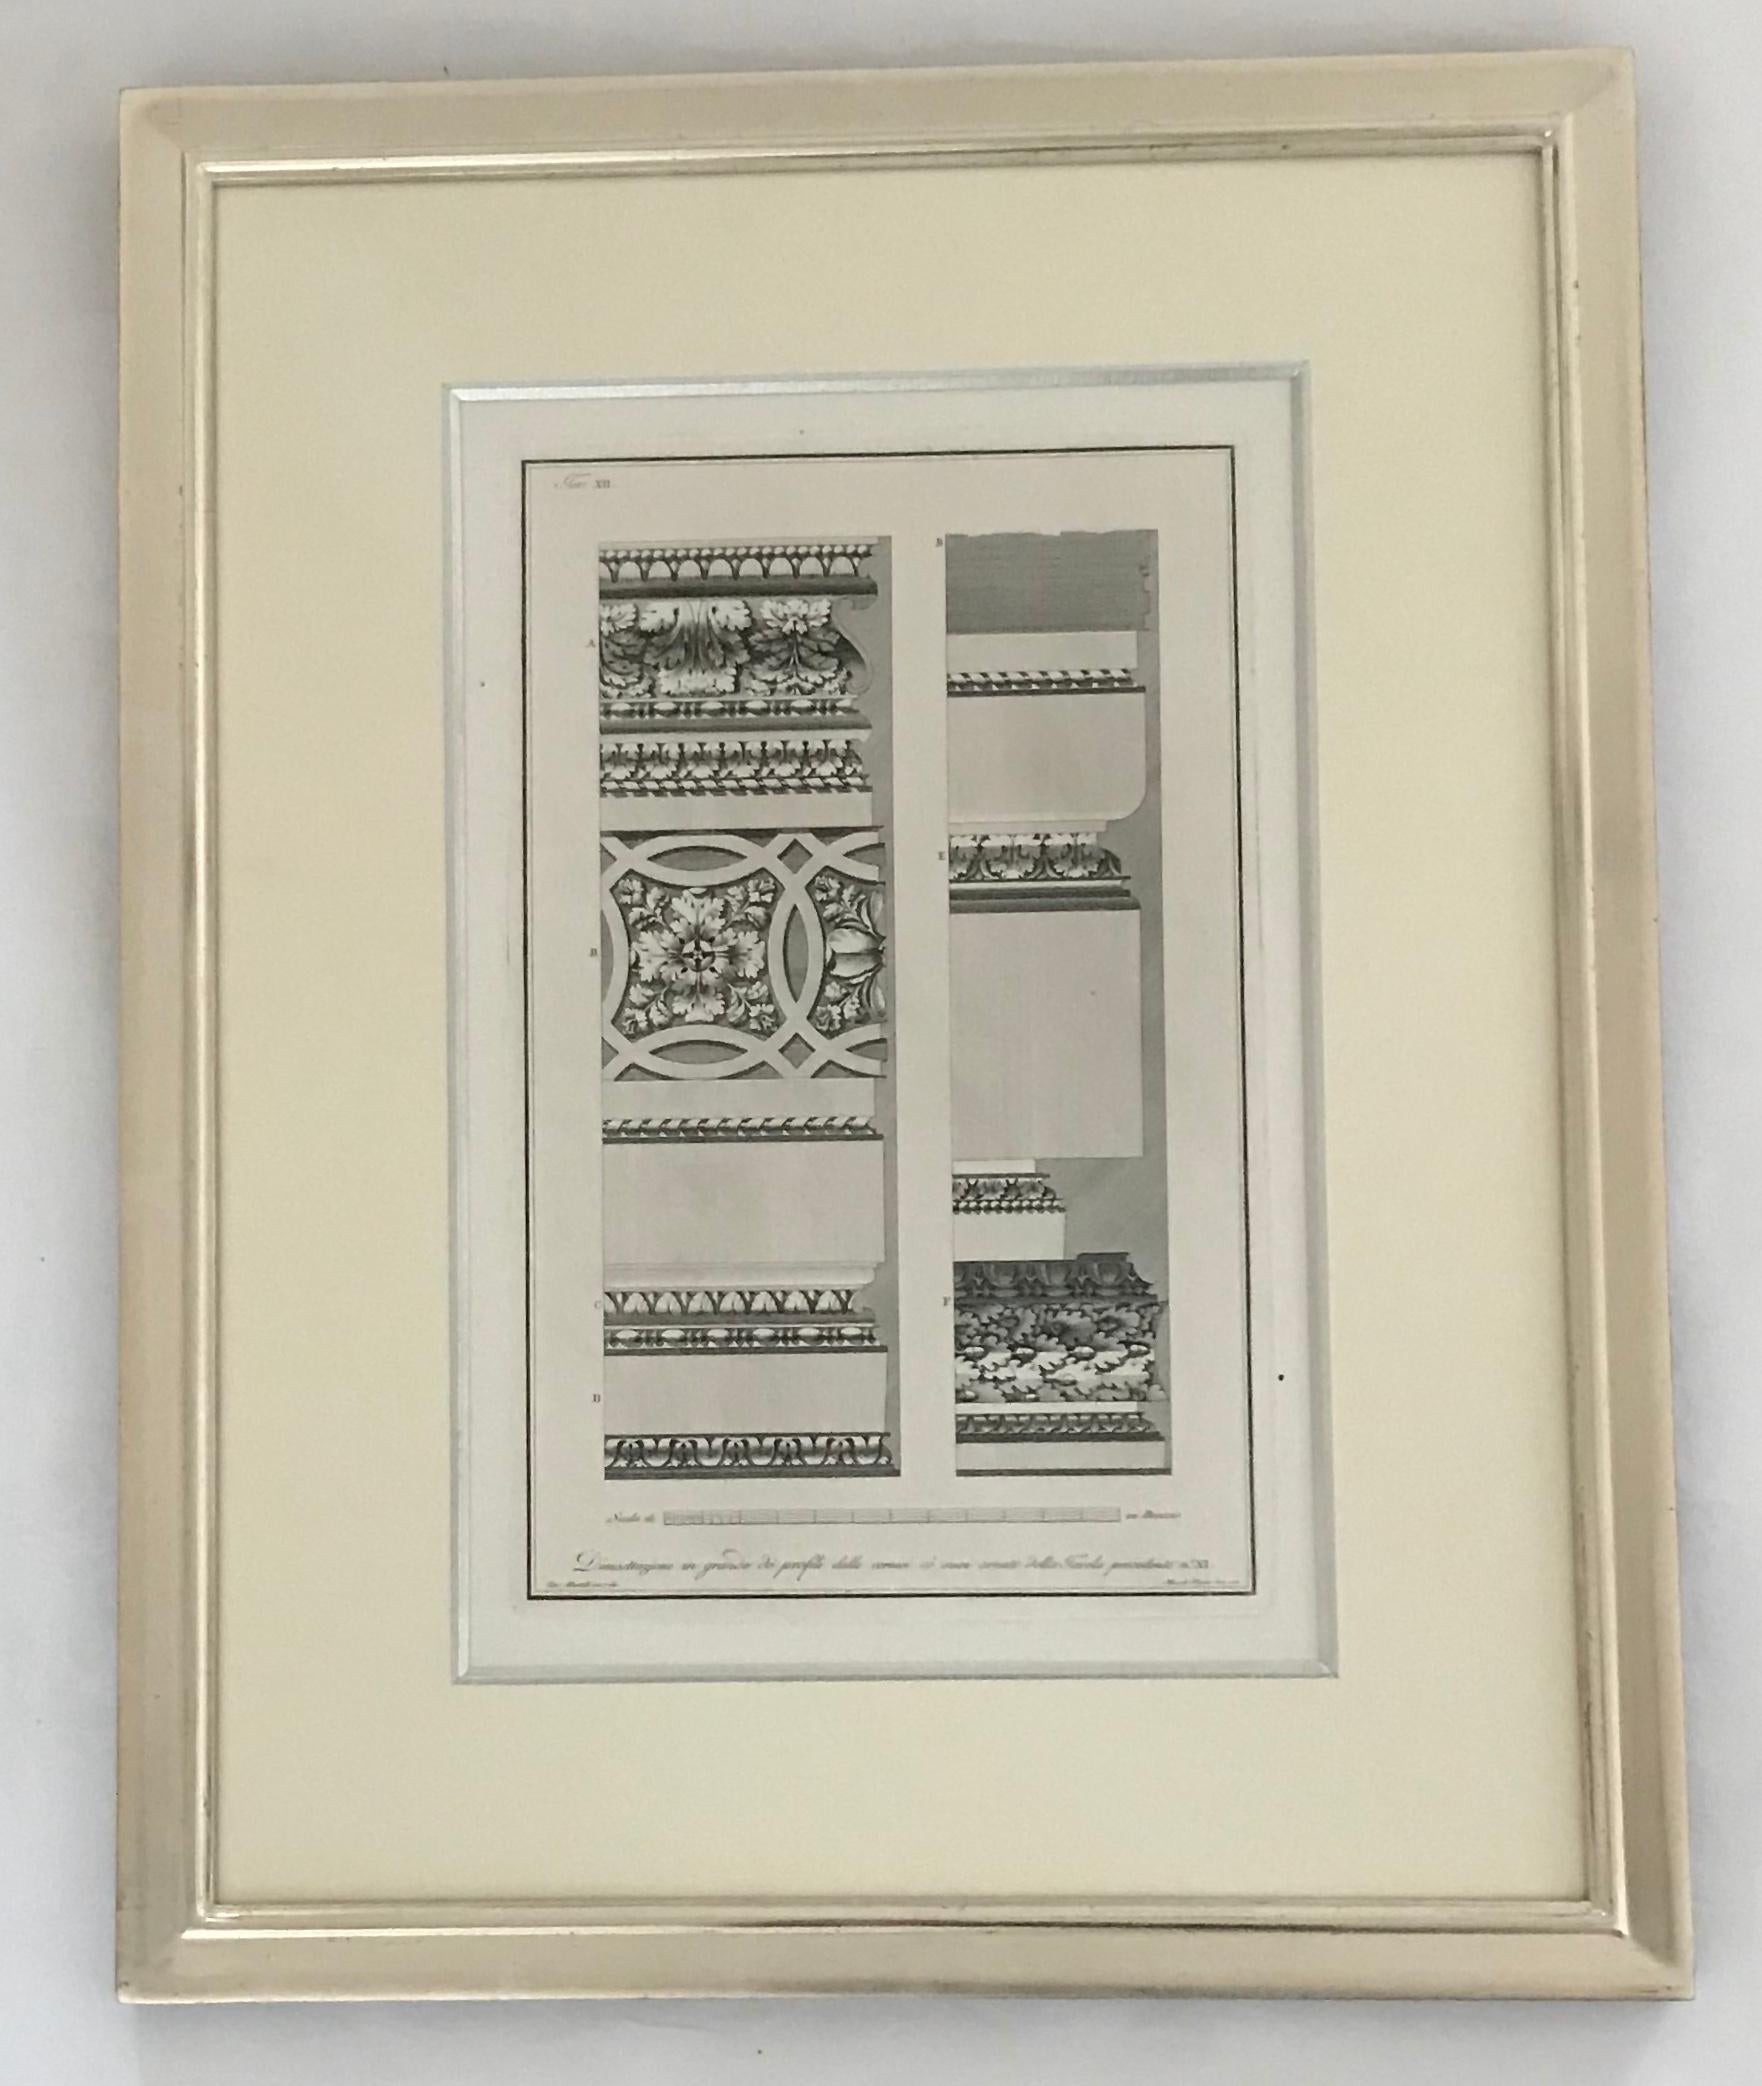 Architectural designs. A set of nine architectural engravings. For Sale 2